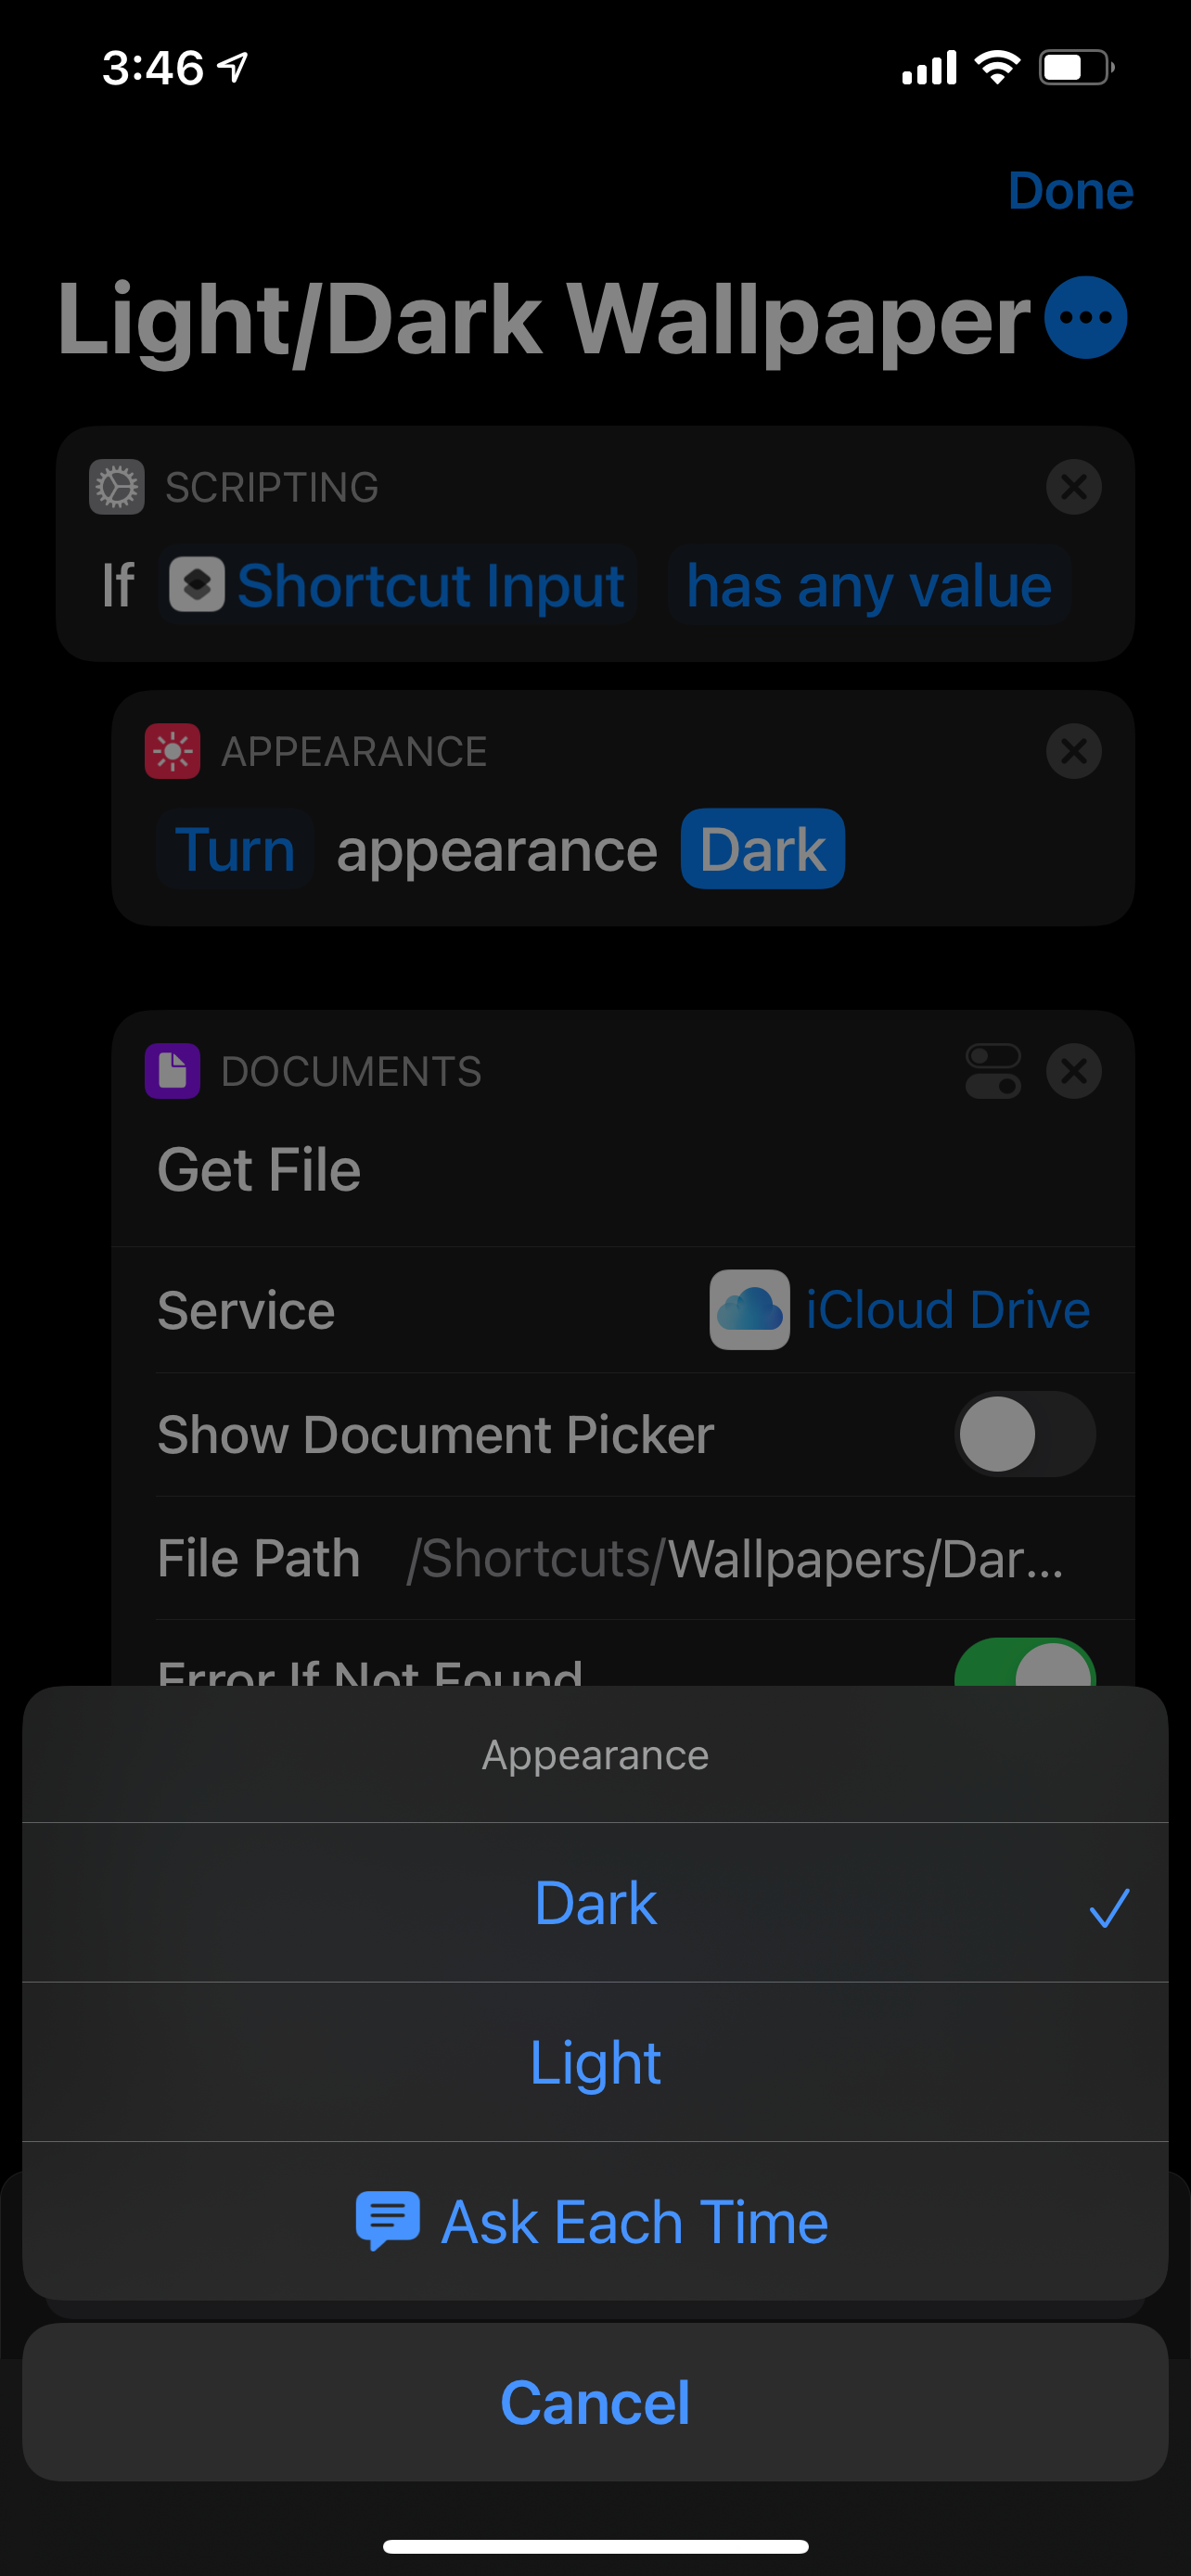 Set device to dark appearance in Shortcut